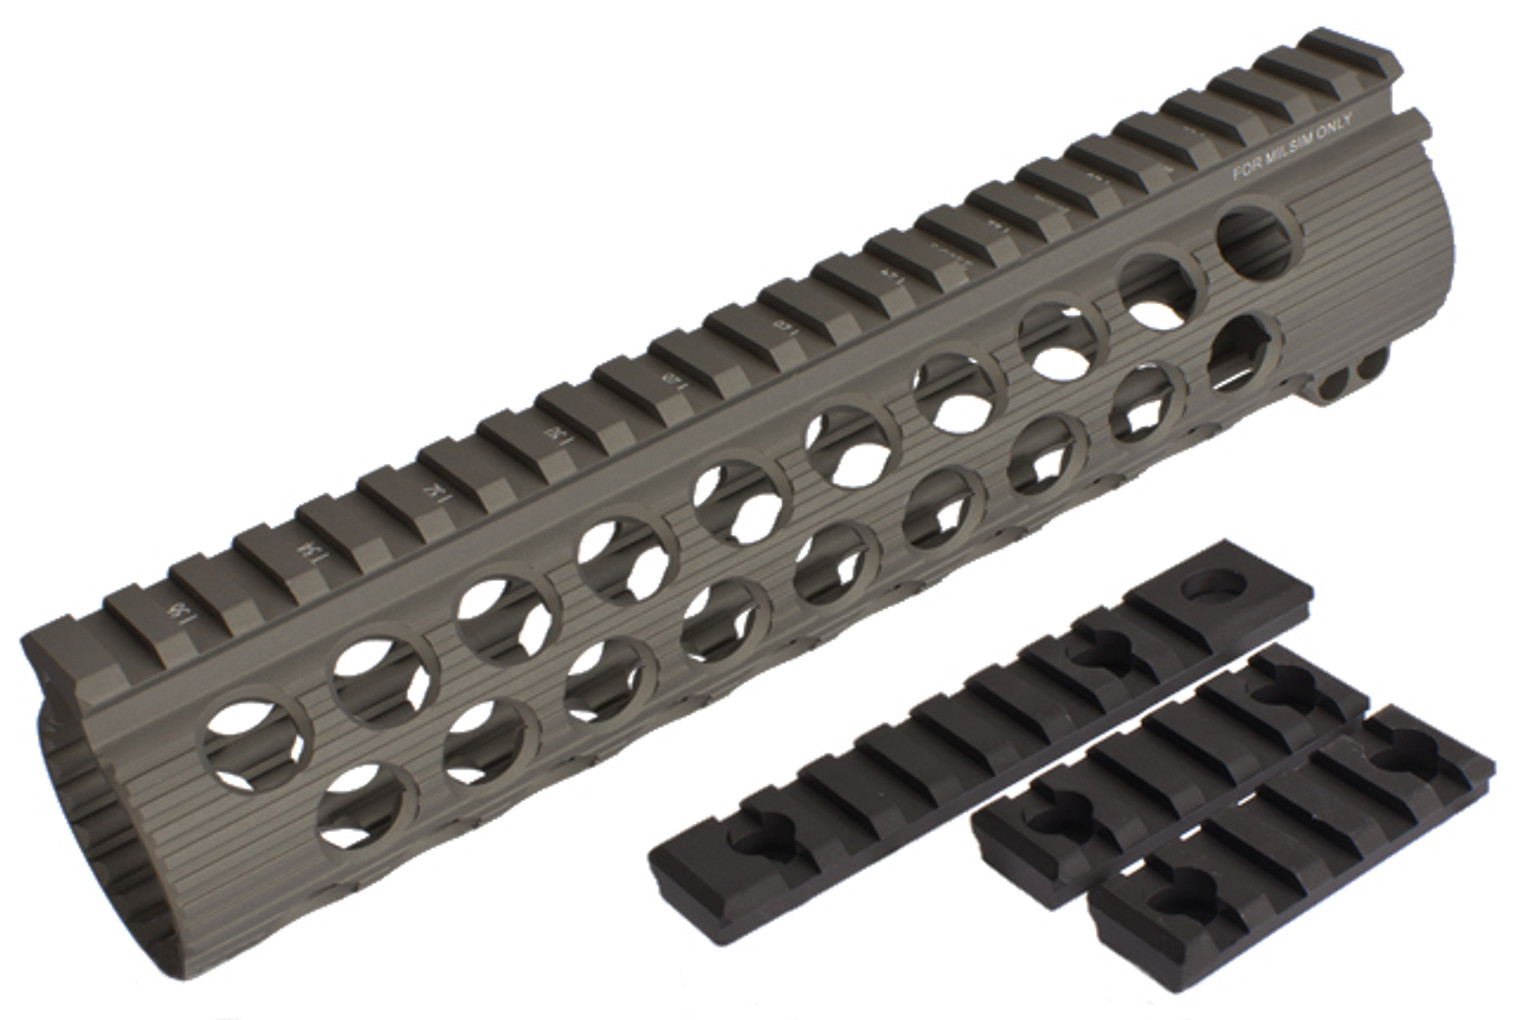 Madbull Airsoft Official Licensed Troy Industries TRX Battle Rail 9" for Airsoft M4/M16 Series AEGs - Dark Earth